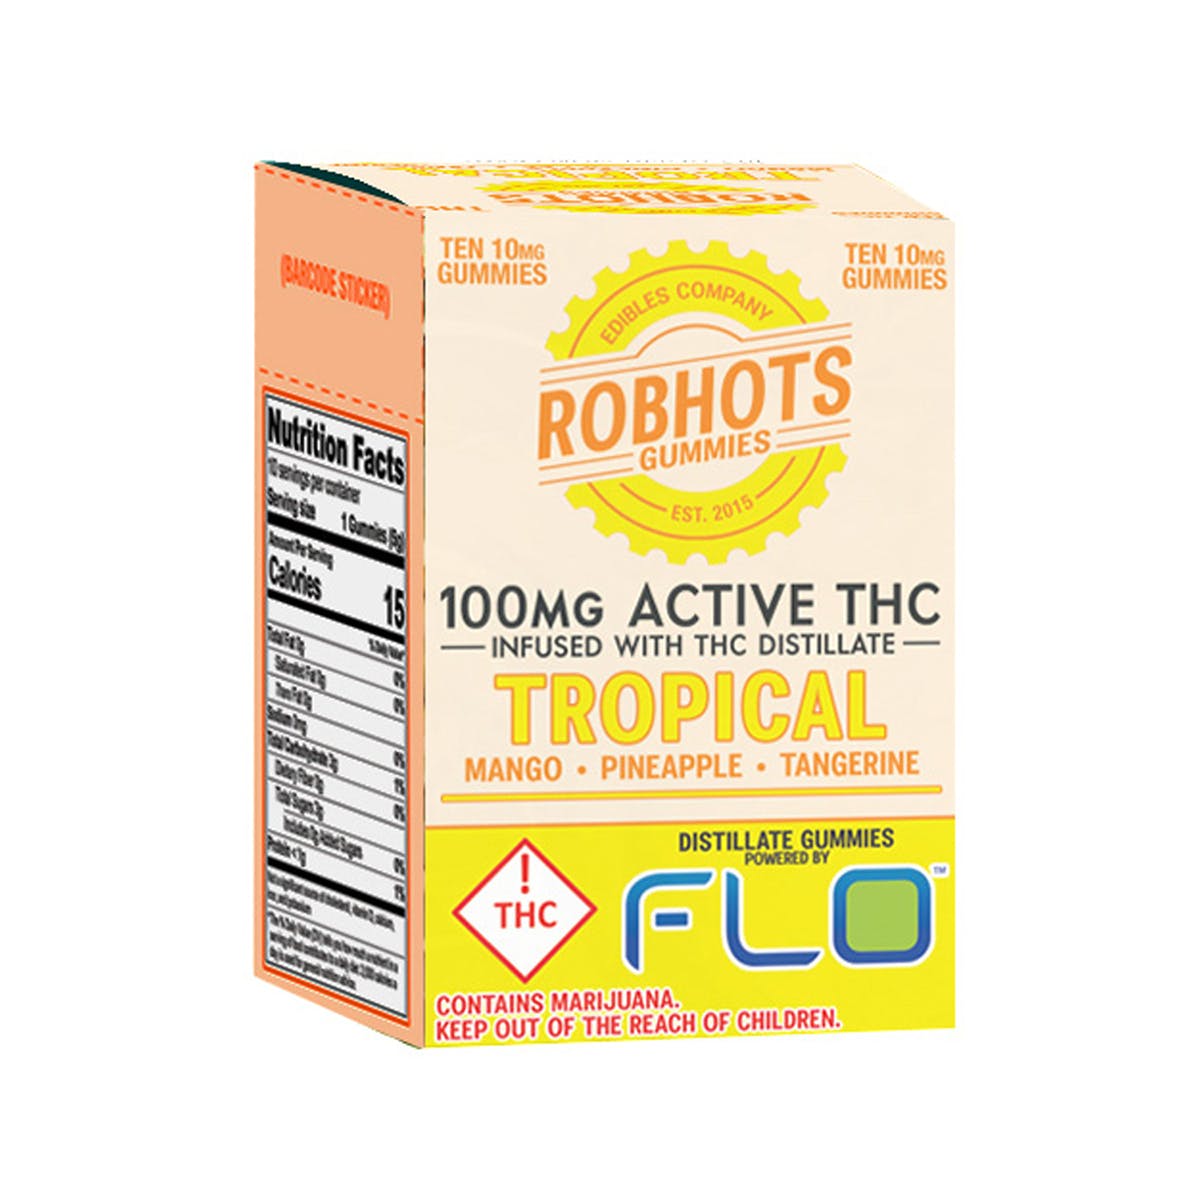 marijuana-dispensaries-the-other-place-is-greener-in-trinidad-tropical-100mg-robhots-gummy-multipack-rec